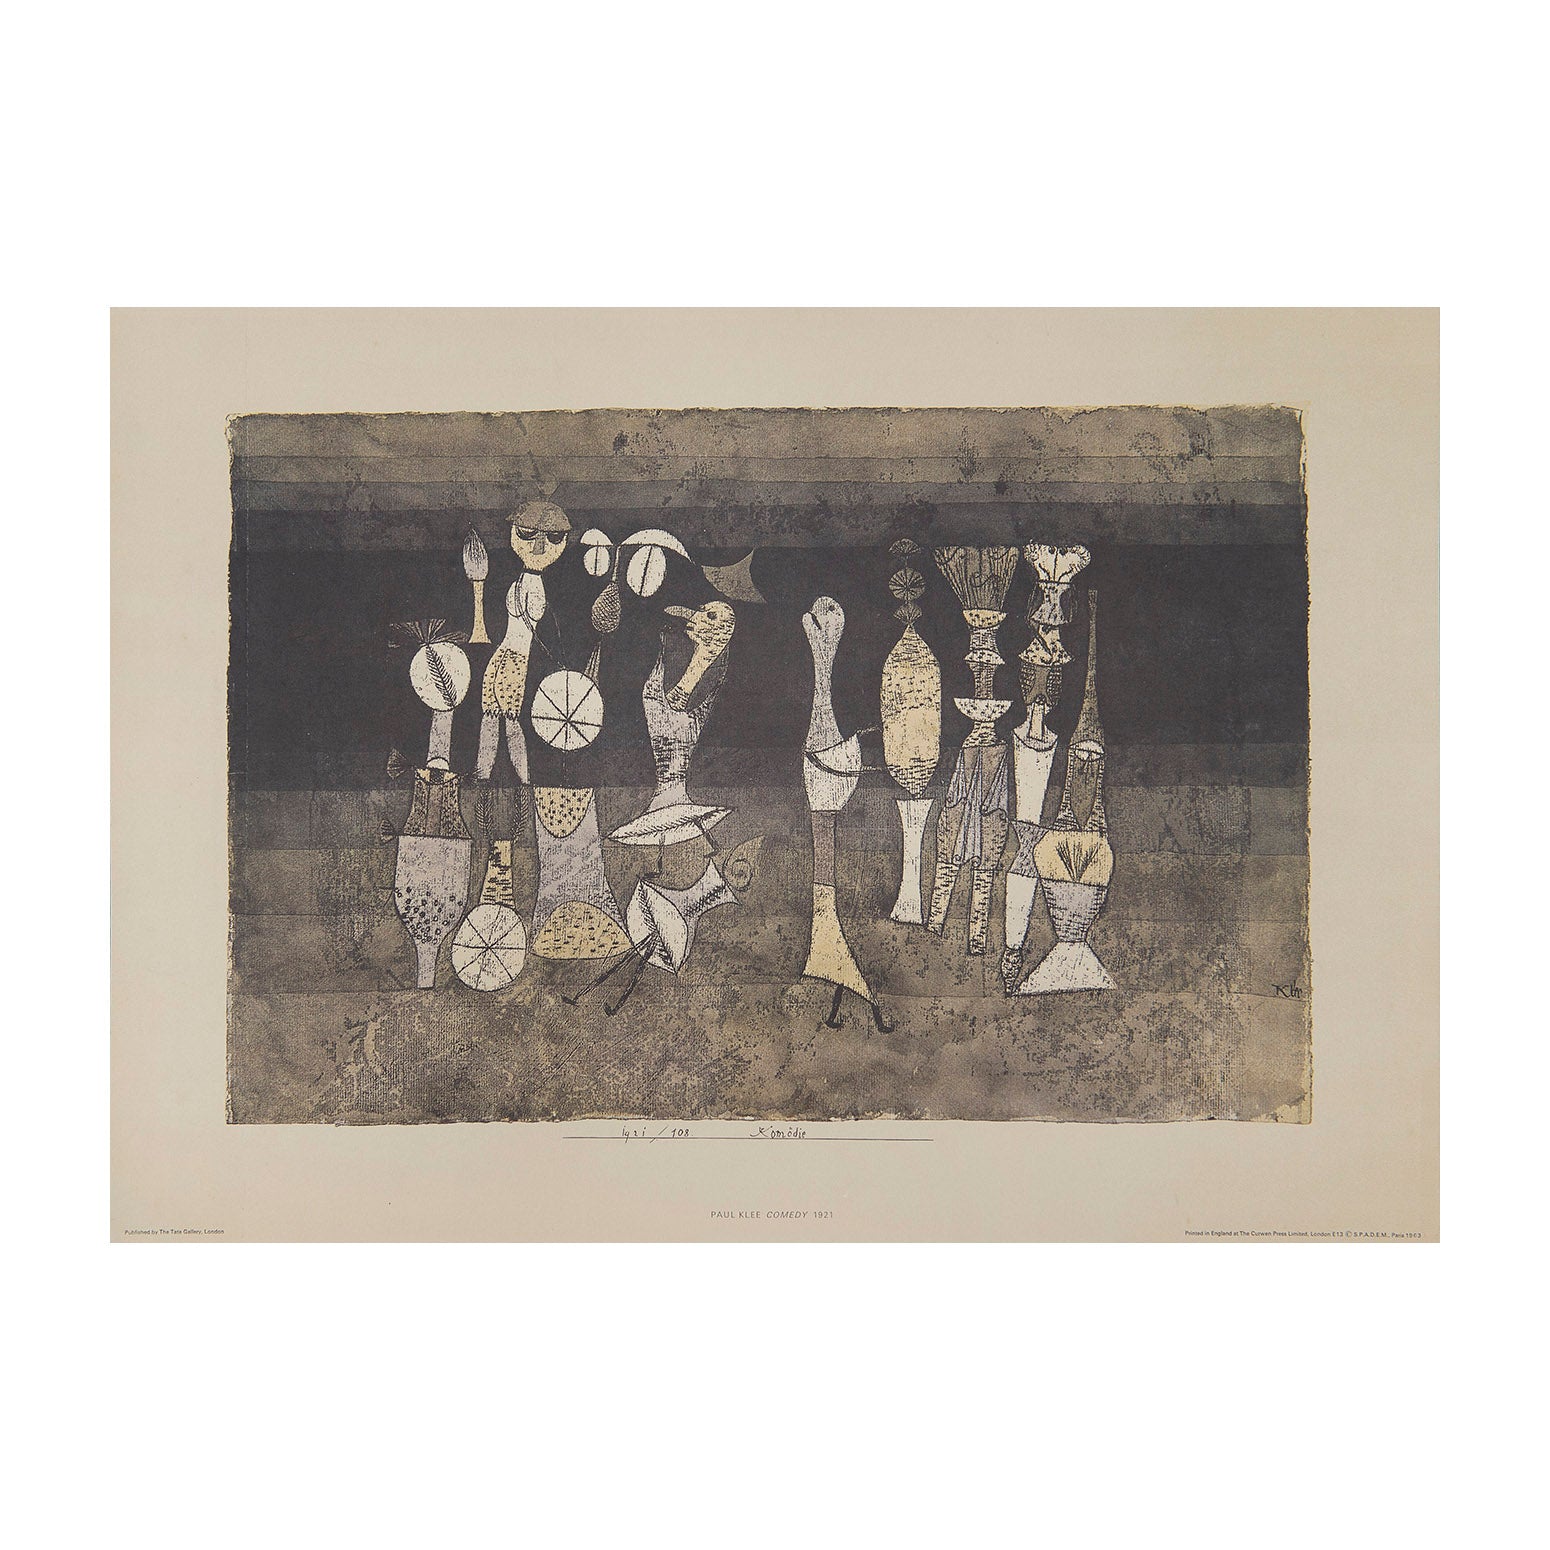 lithographic print, Comedy, 1921, by Paul Klee (1879-1940), printed by the Curwen Press for the Tate Gallery, 1963. 